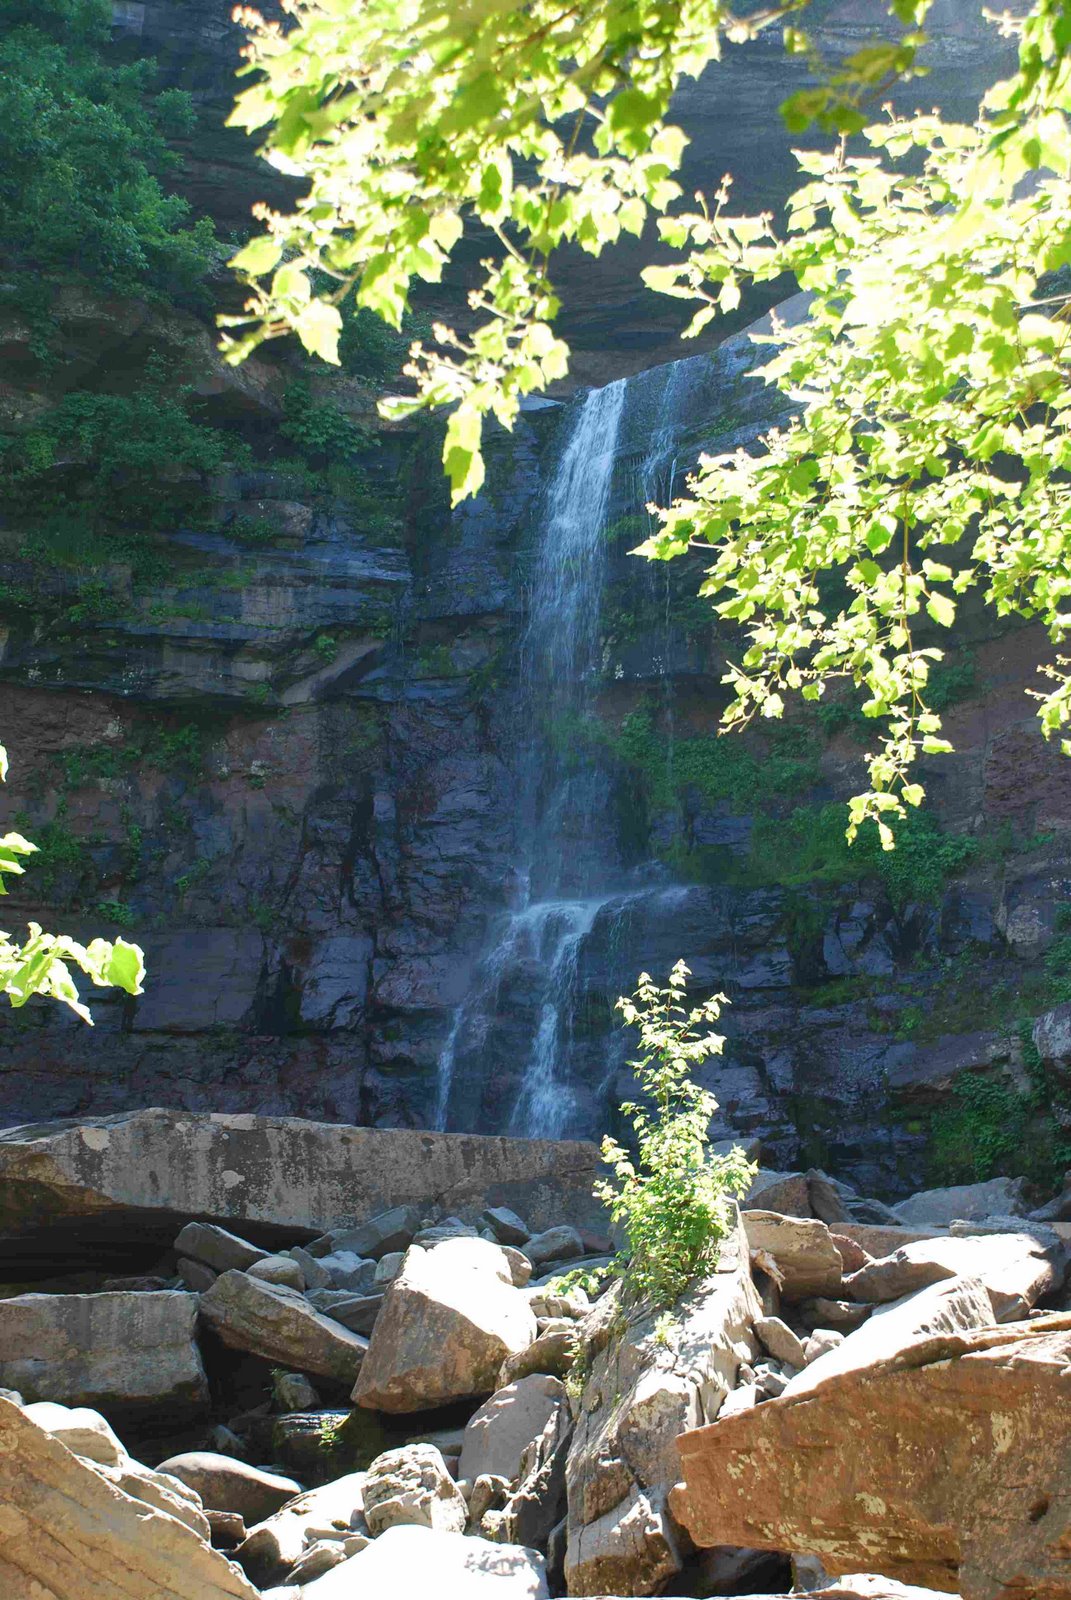 [Copy+of+06-25-08+Kaaterskill+Falls+and+Trail+5.jpg]